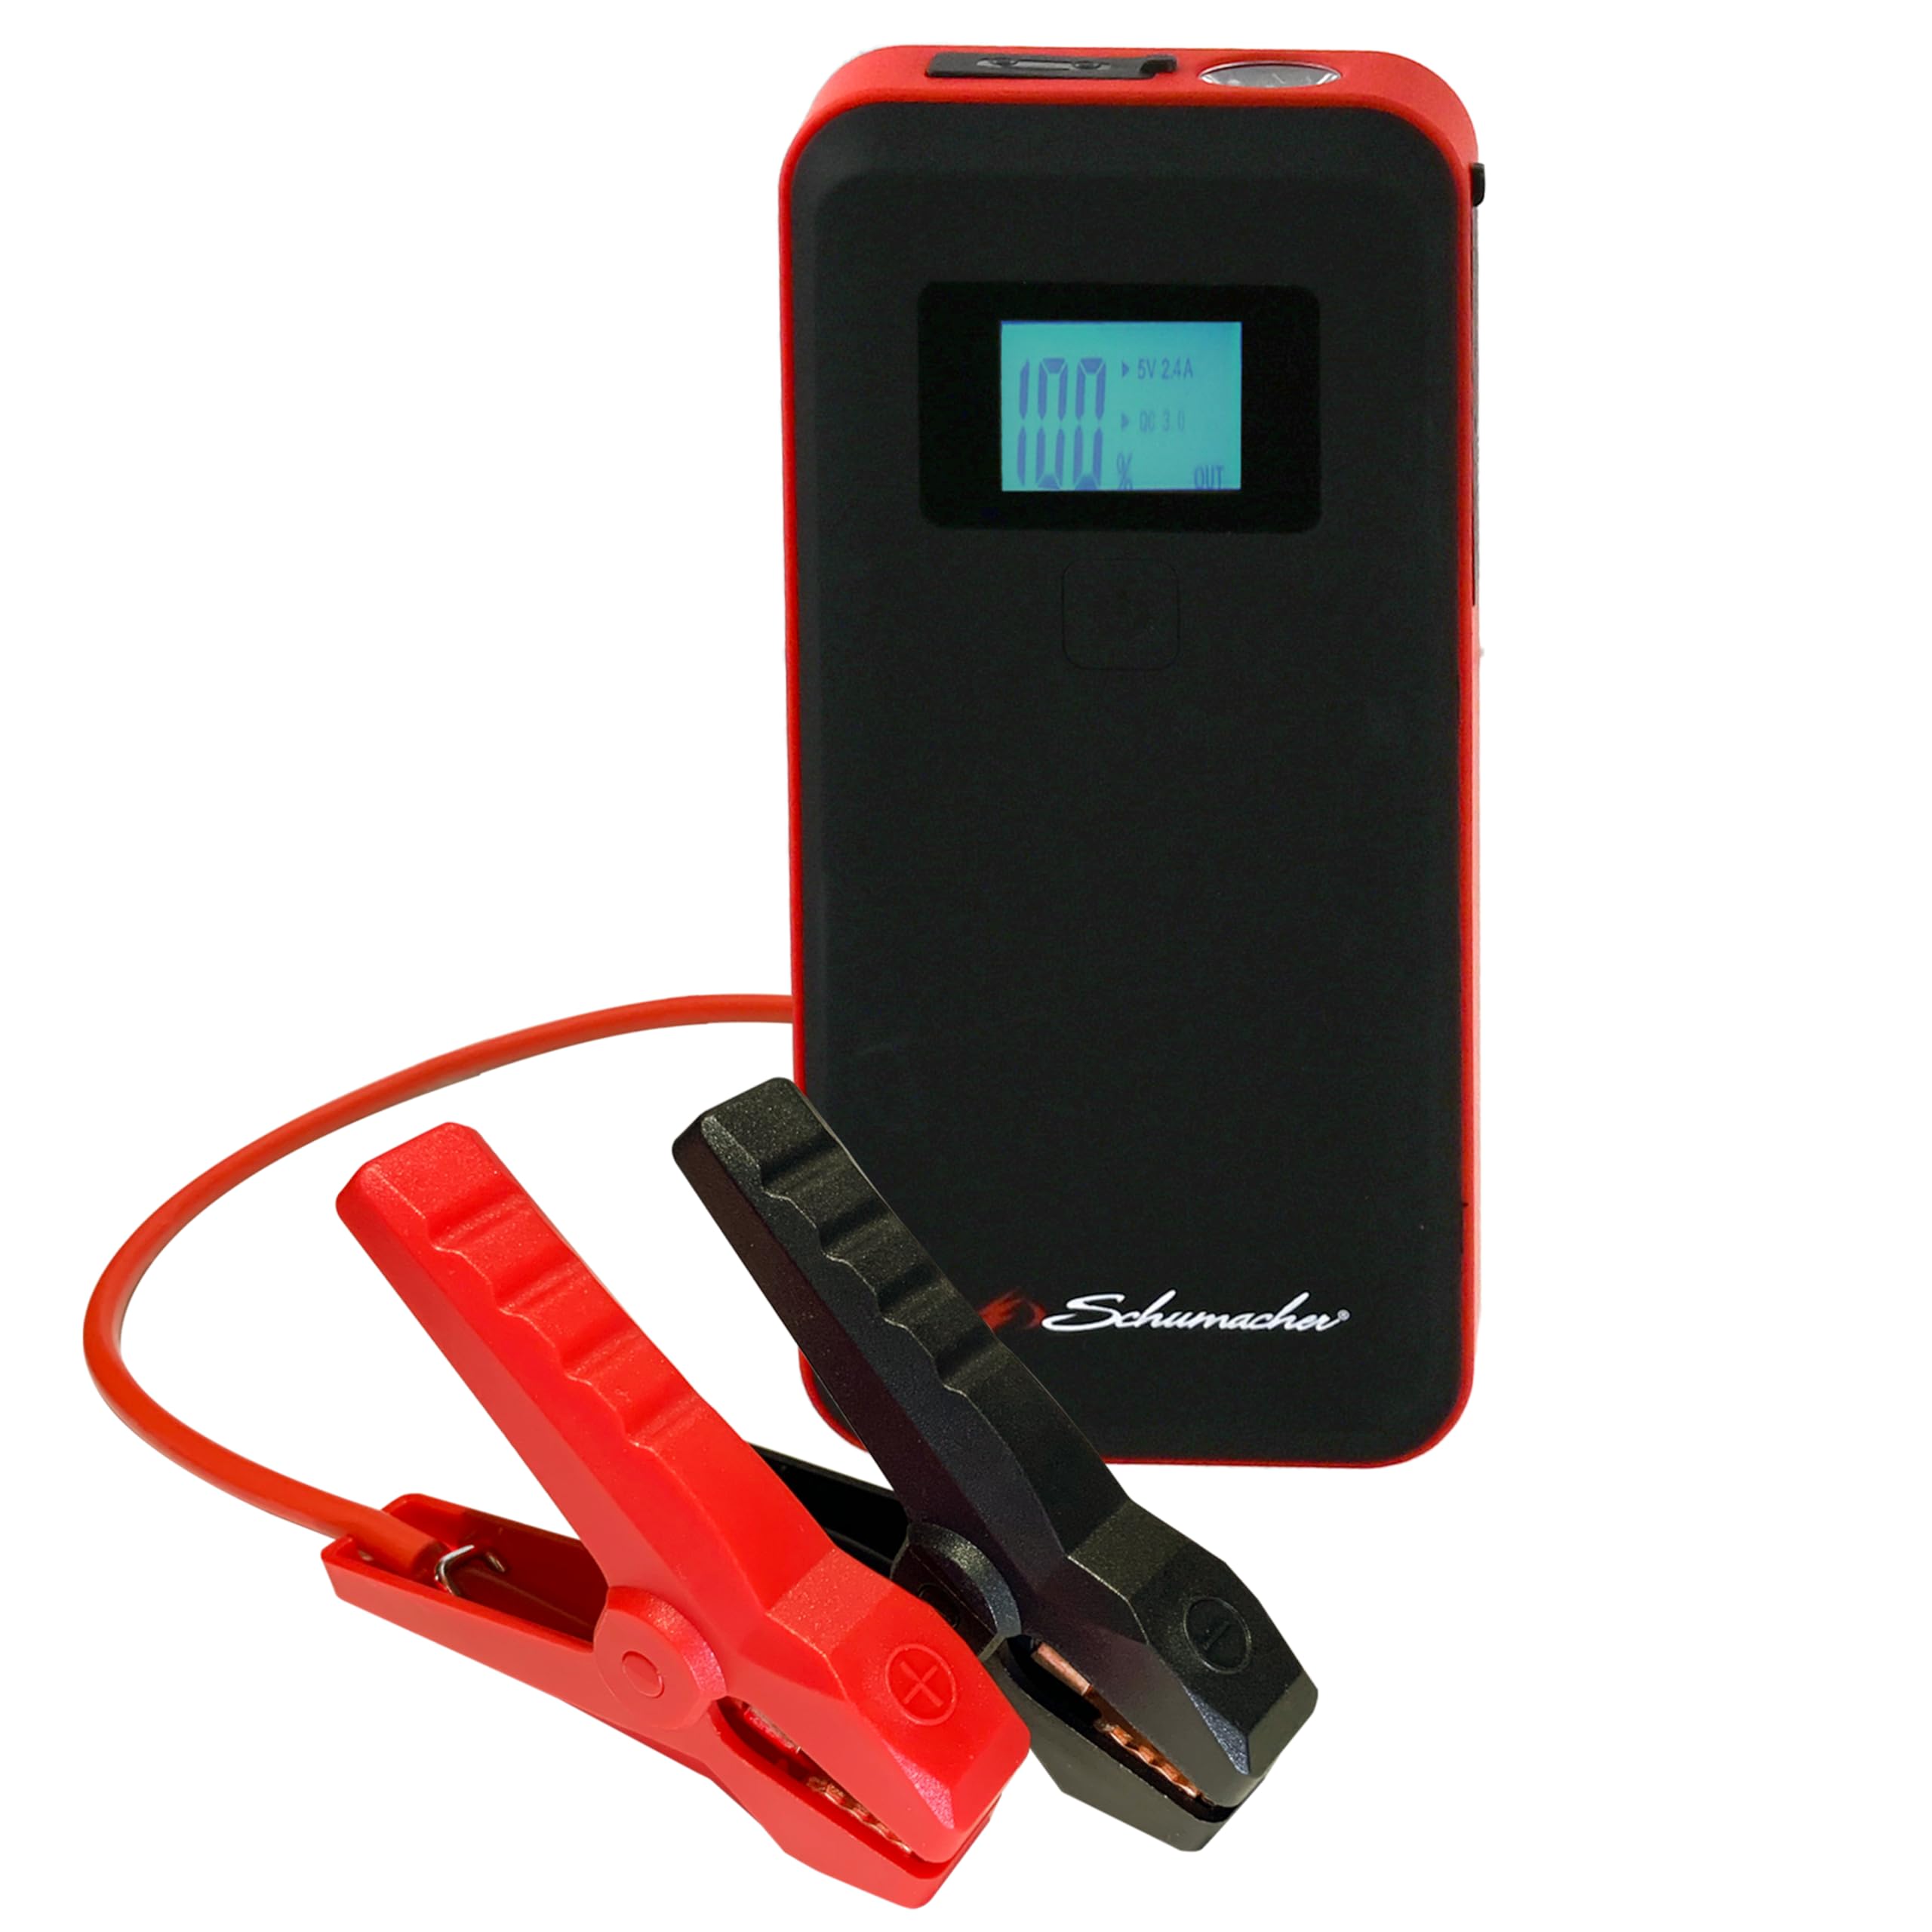 $46.04: SL1639 Lithium Portable Power Pack and Jump Starter, 1000 Amps, 12 Volt